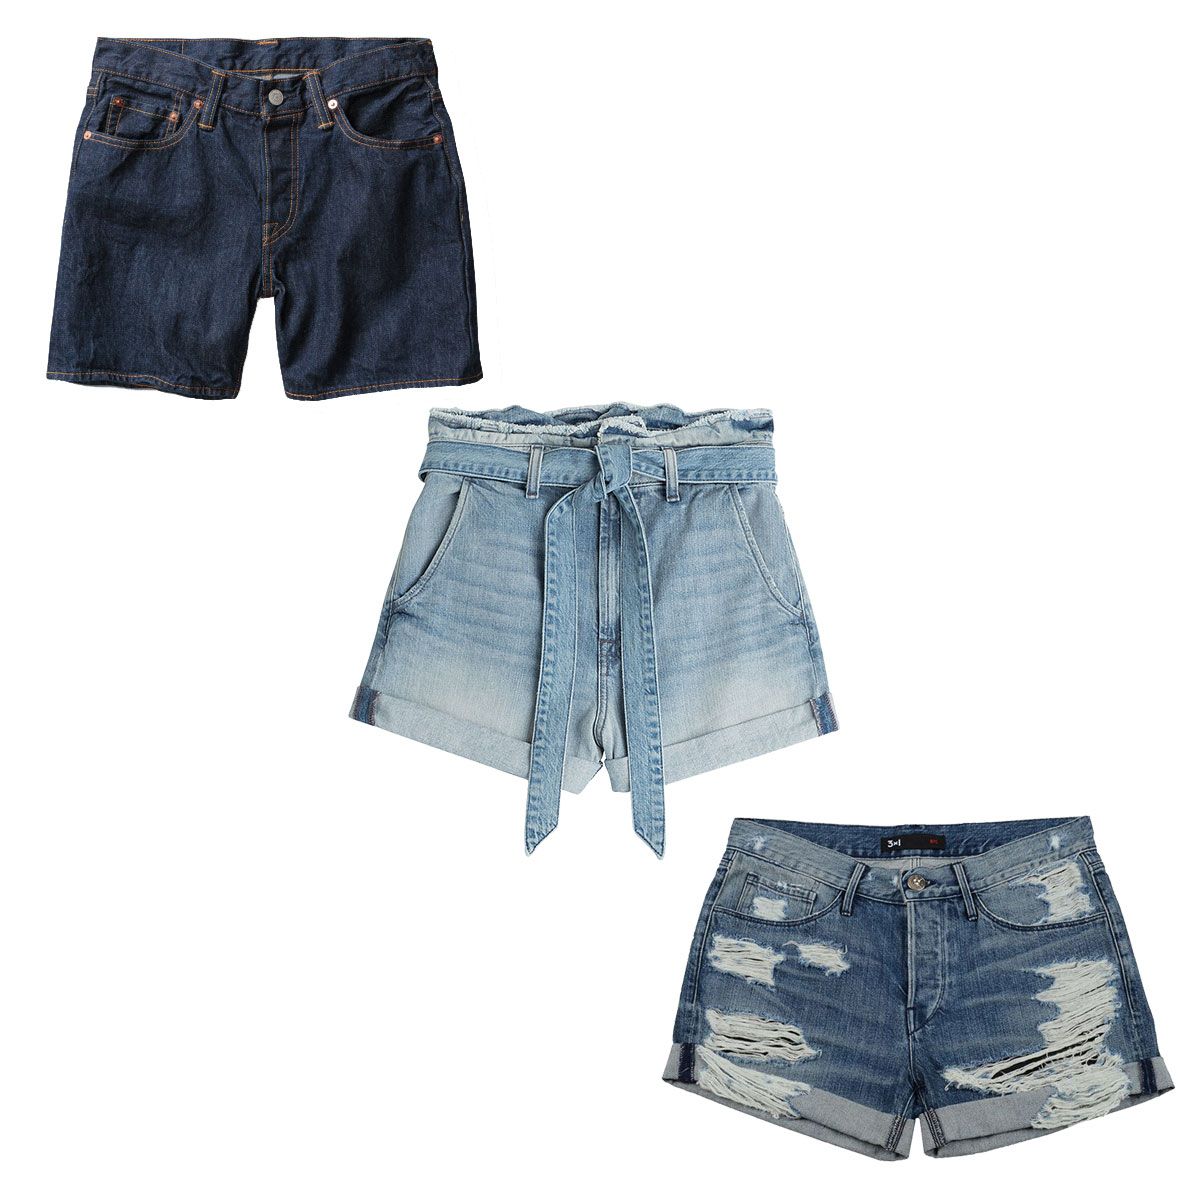 Struggling To Find Flattering Shorts? These Are The Best Shorts For Each  Body Type